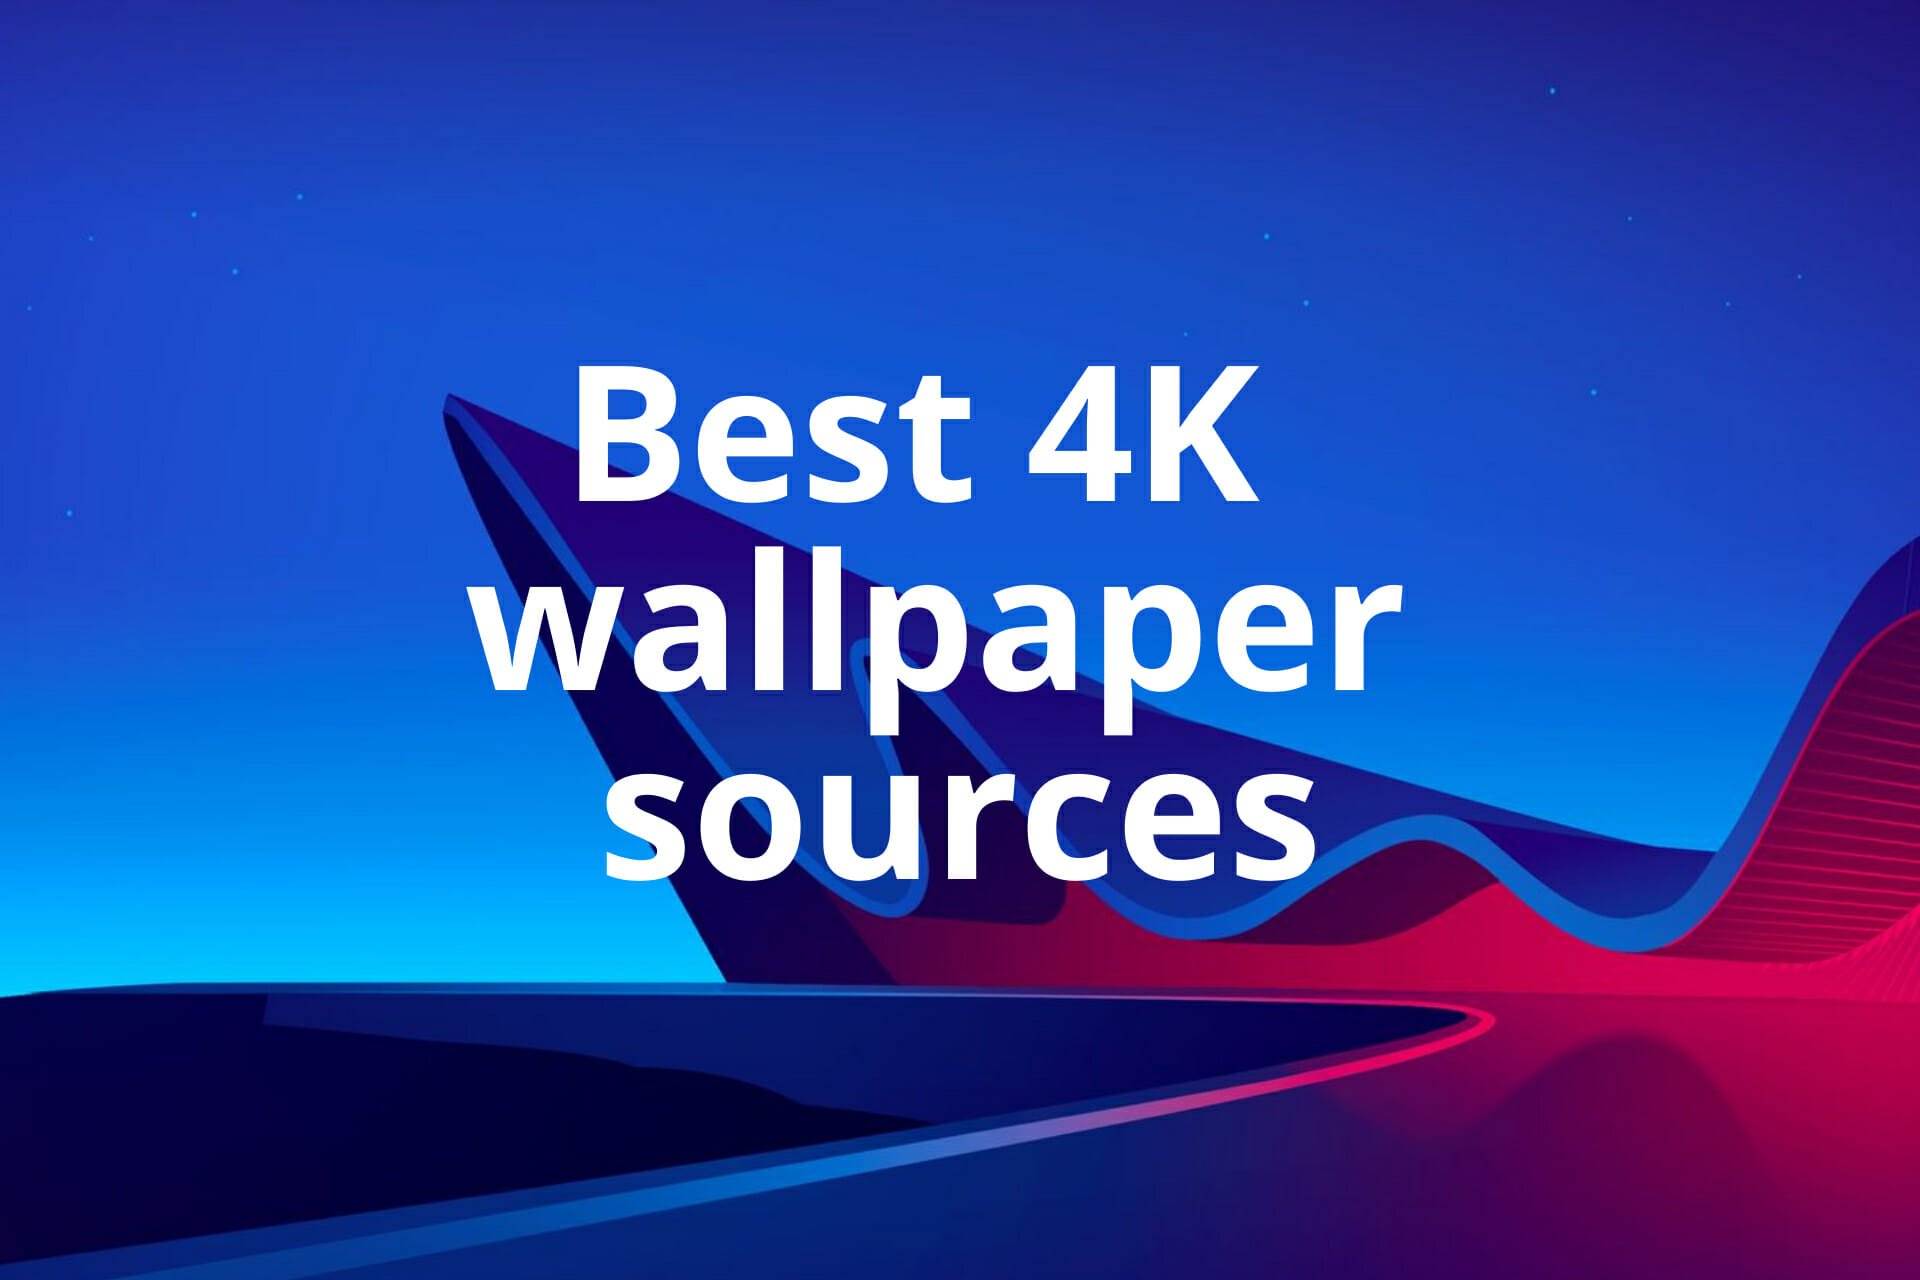 Best desktop 4k wallpapers to customize your device